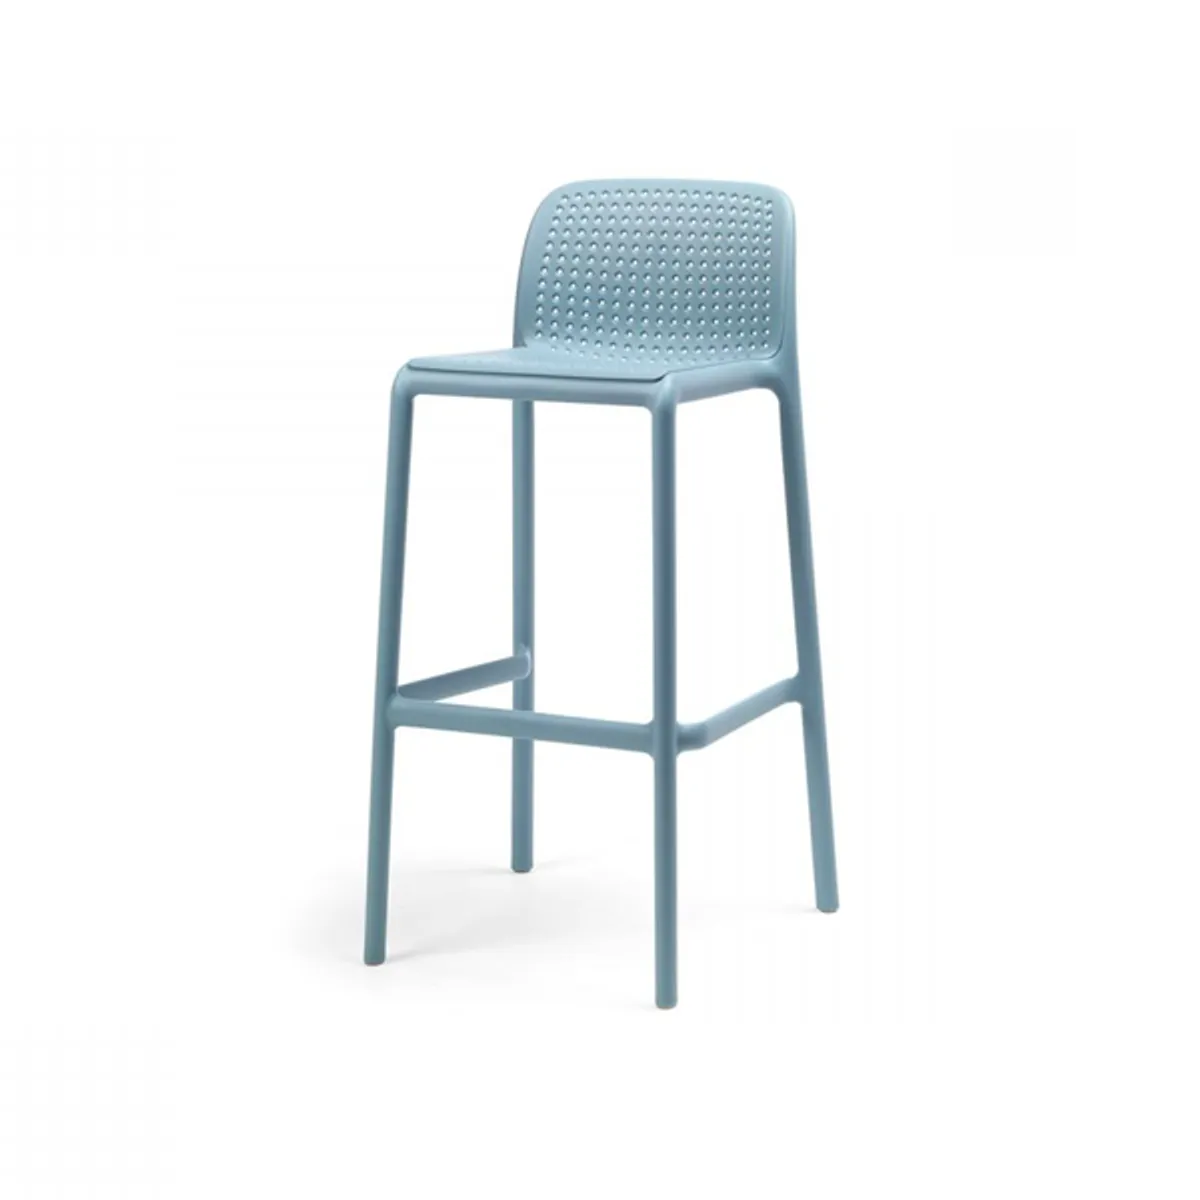 Lido bar stool Inside Out Contracts4